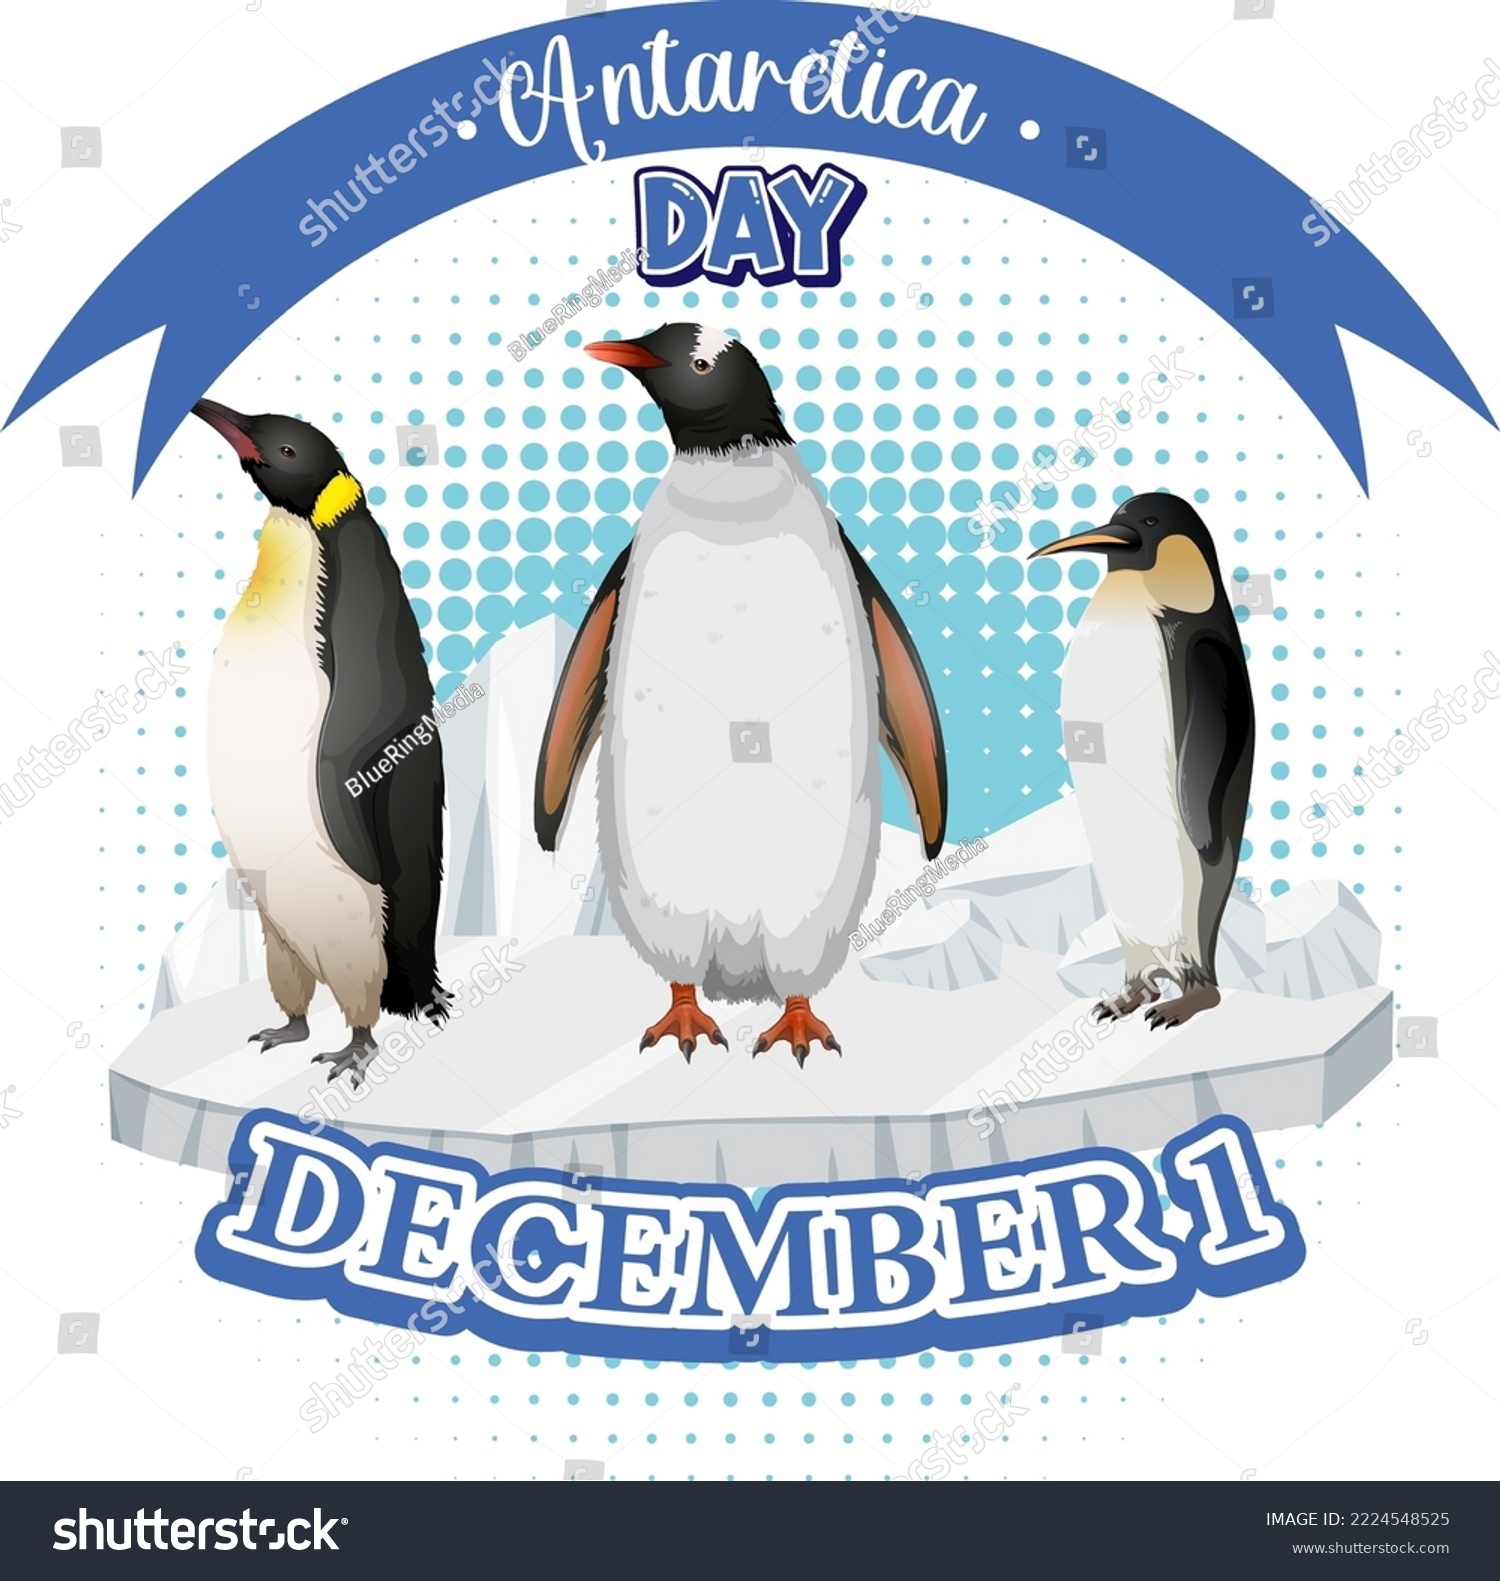 SVG of Antarctica day text with penguin illustration svg